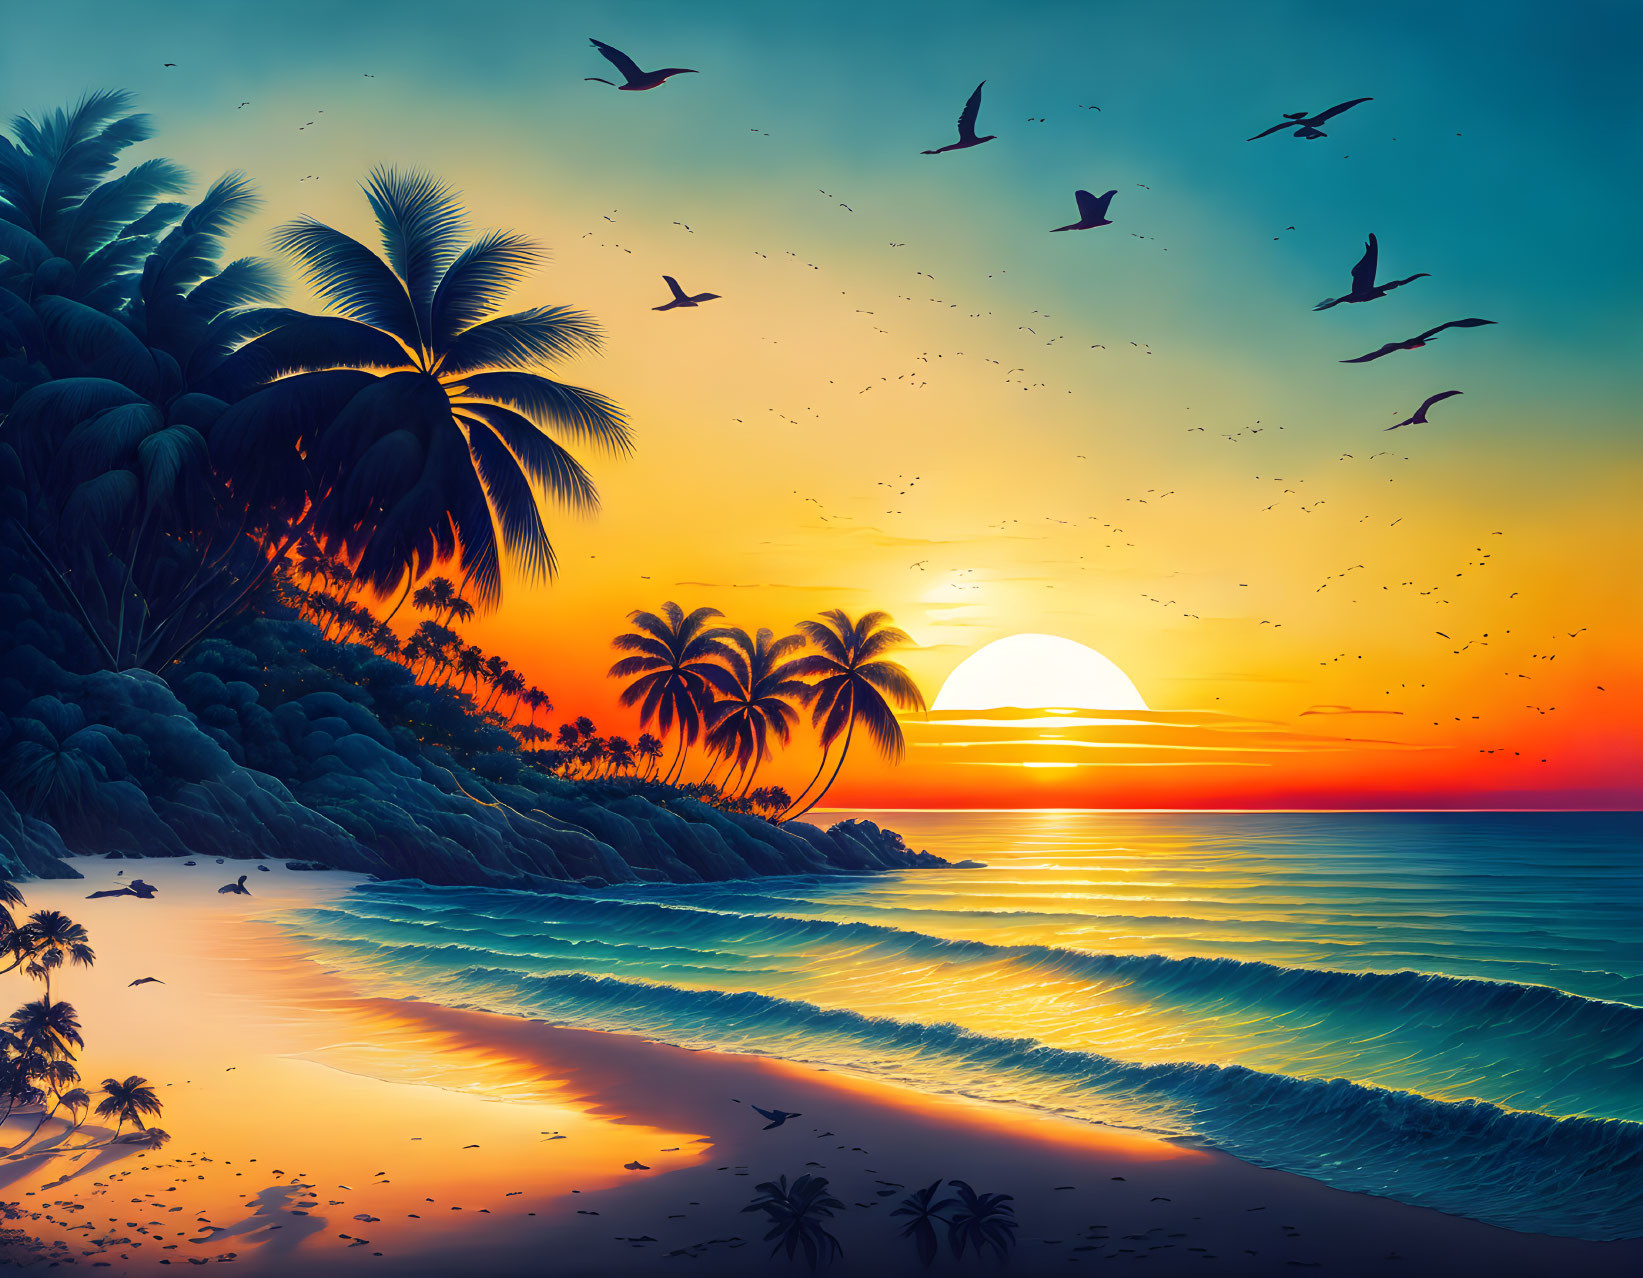 Scenic Tropical Beach Sunset with Palm Trees and Birds